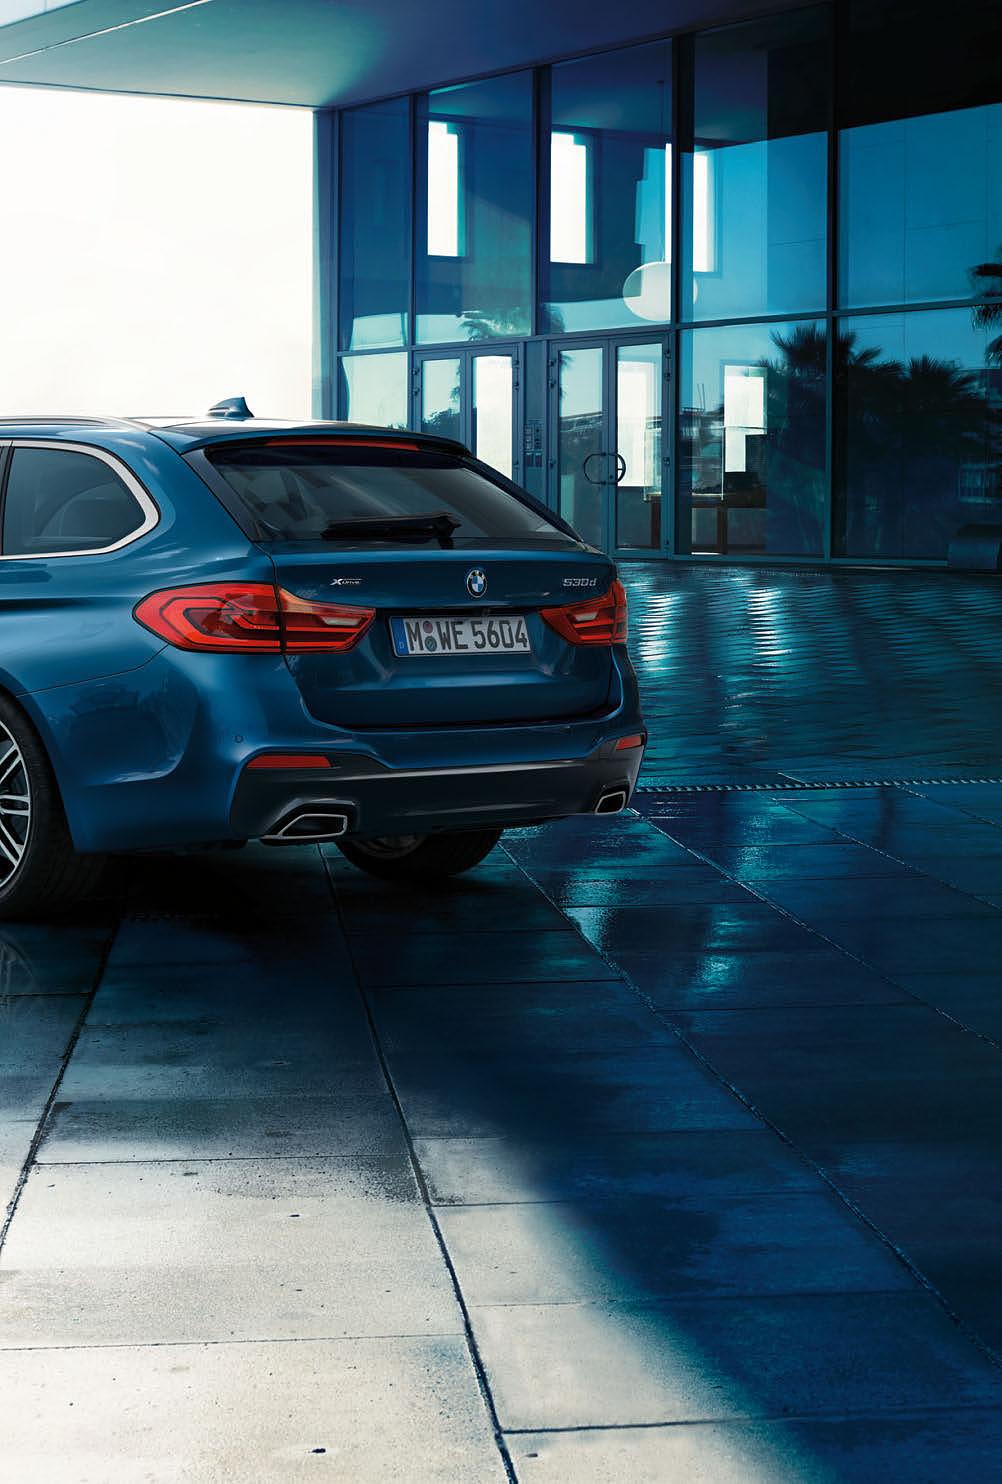 THE NEW BMW 5 SERIES TOURING OFFERS UNIQUE DYNAMIC DRIVING CHARACTERISTICS.